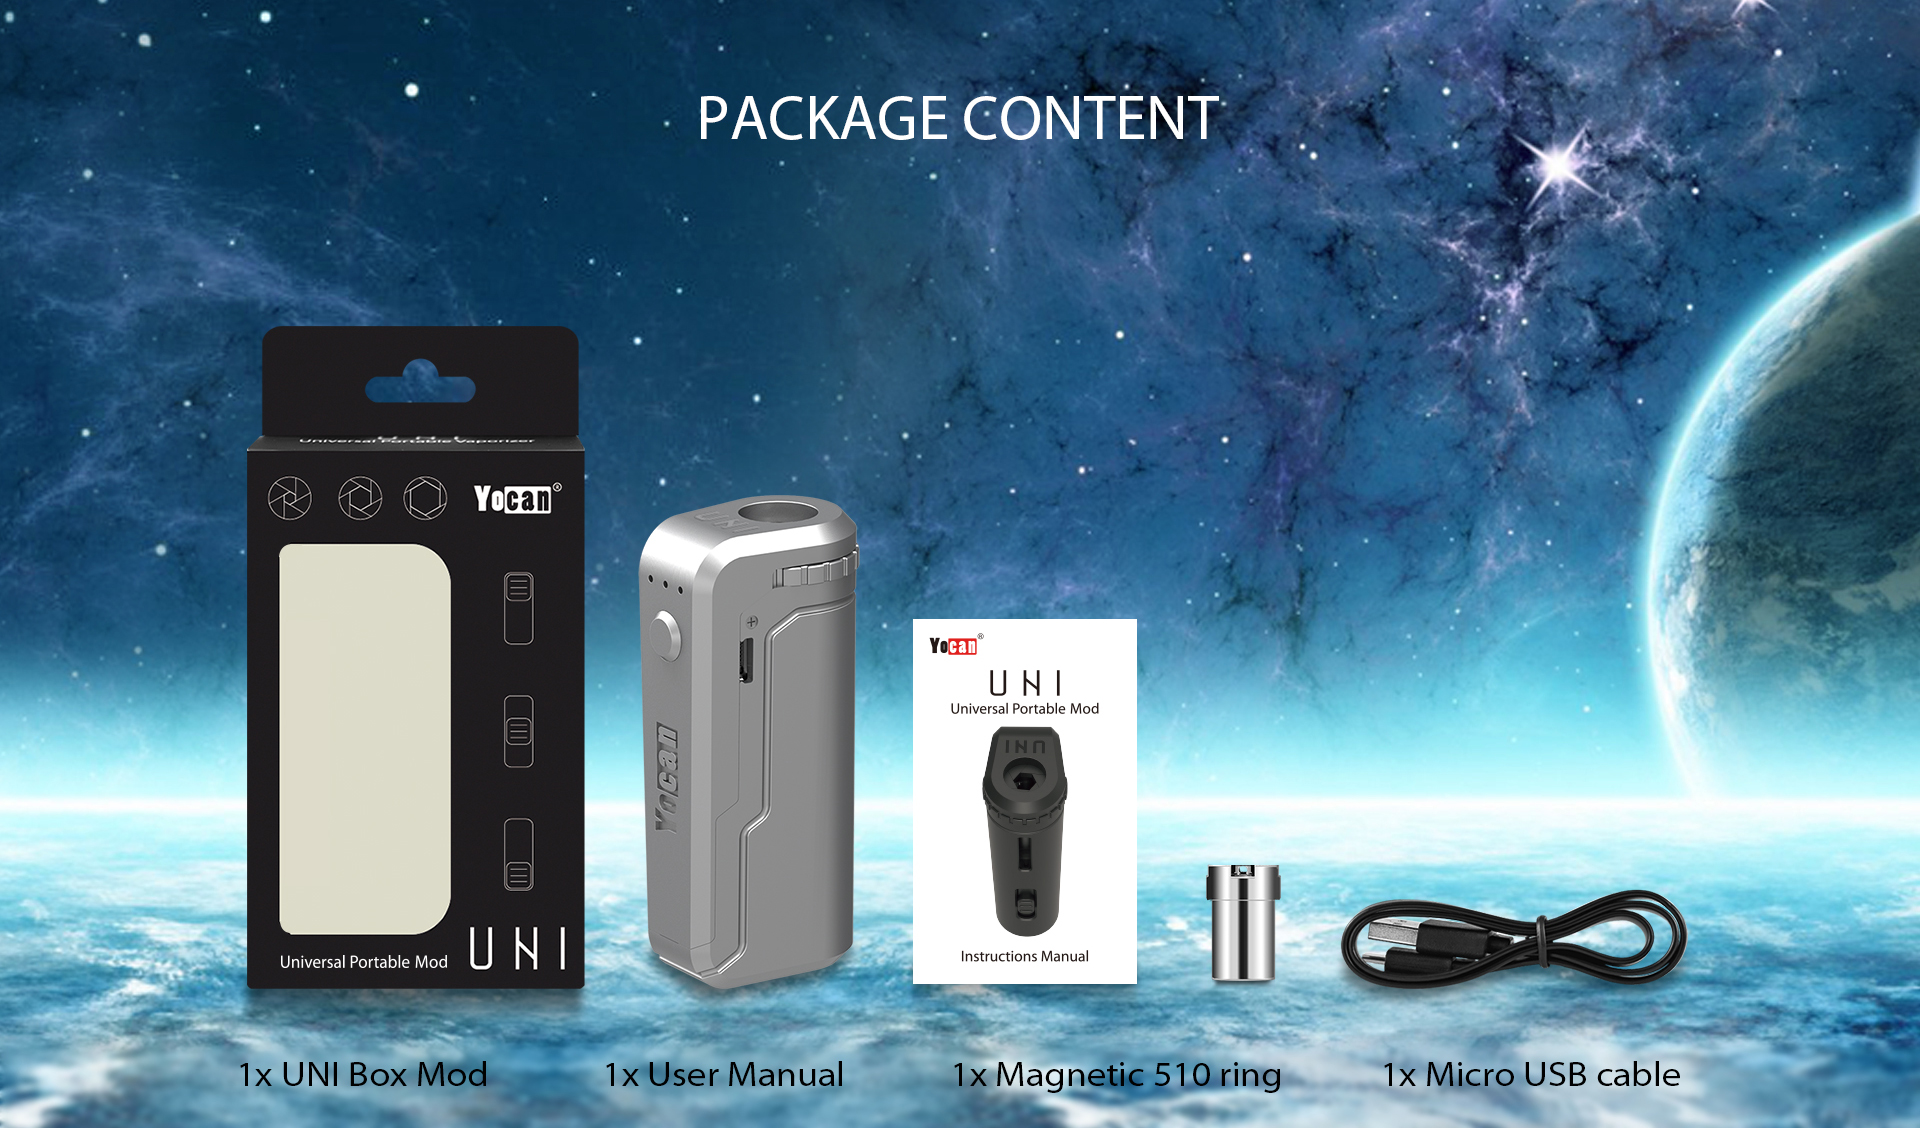 Yocan UNI package content